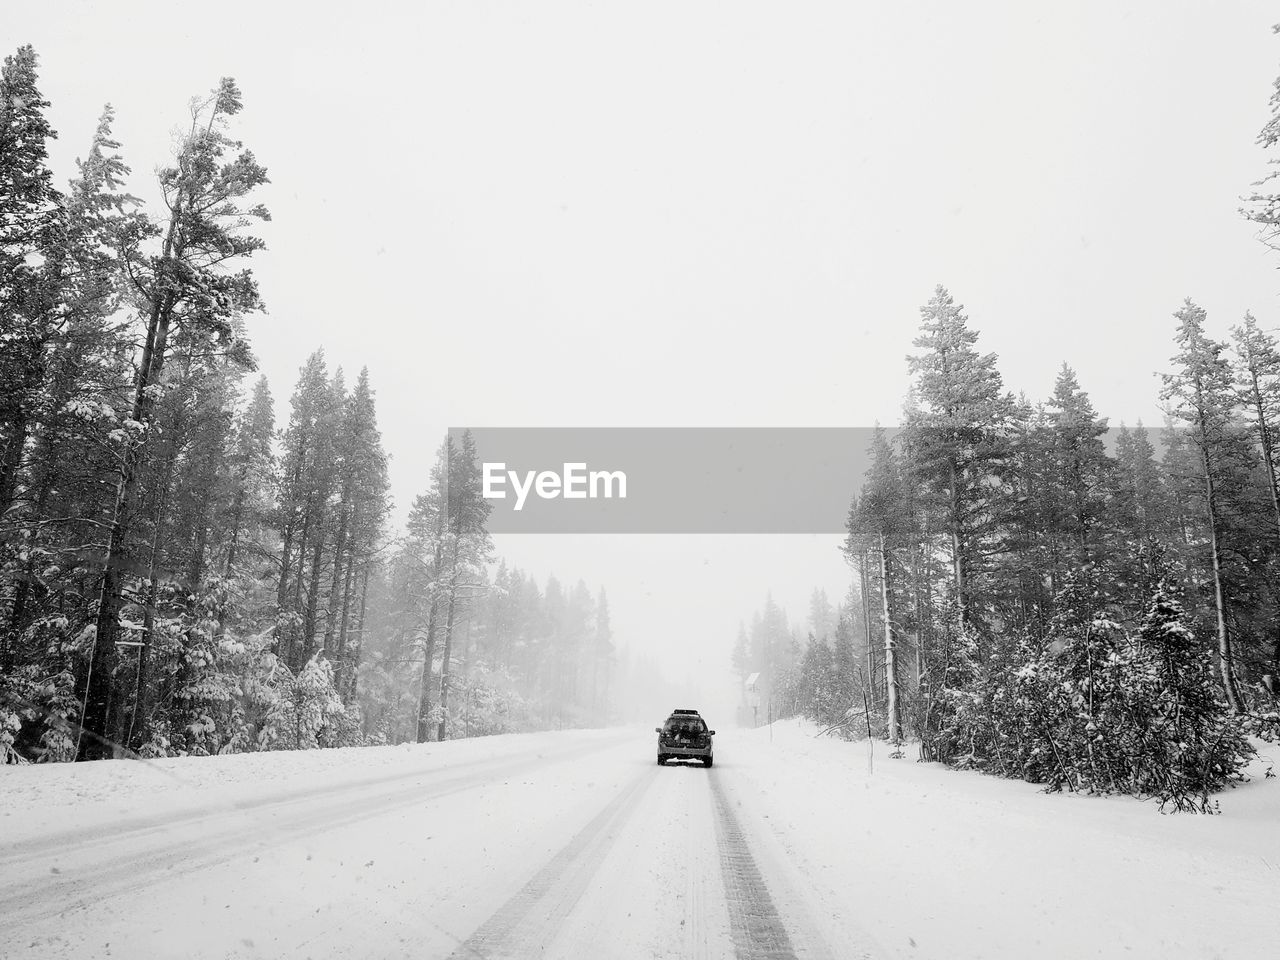 Car moving on snow covered road amidst trees during winter